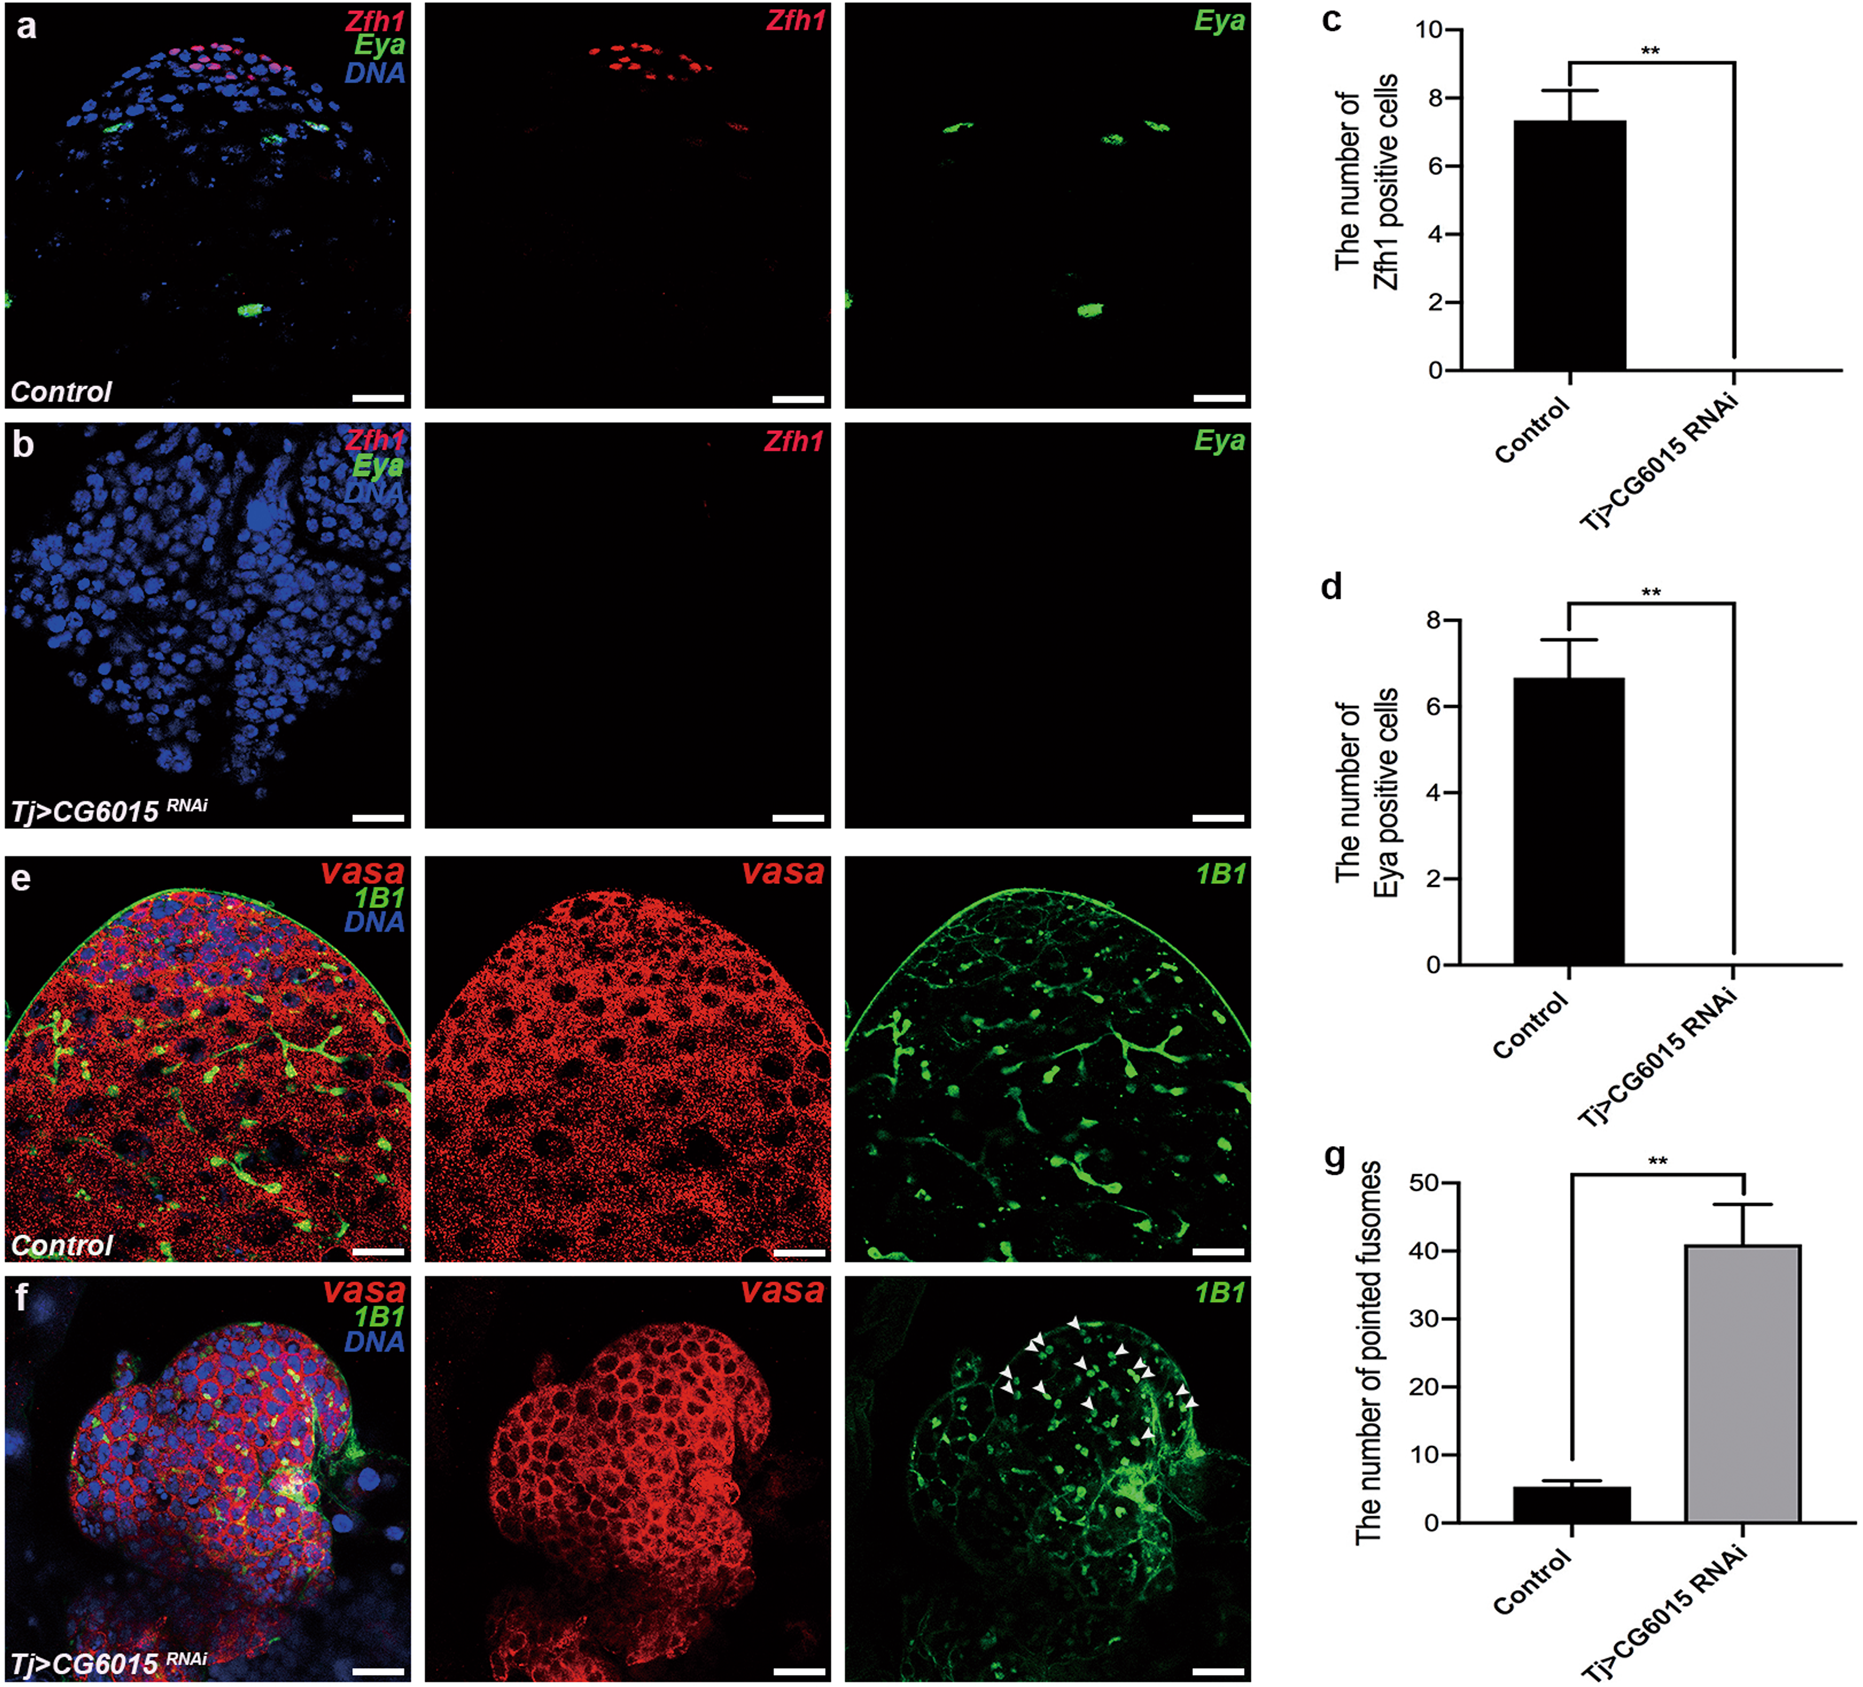 Somatic CG6015 mediates cyst stem cell maintenance and germline stem cell  differentiation via EGFR signaling in Drosophila testes | Cell Death  Discovery